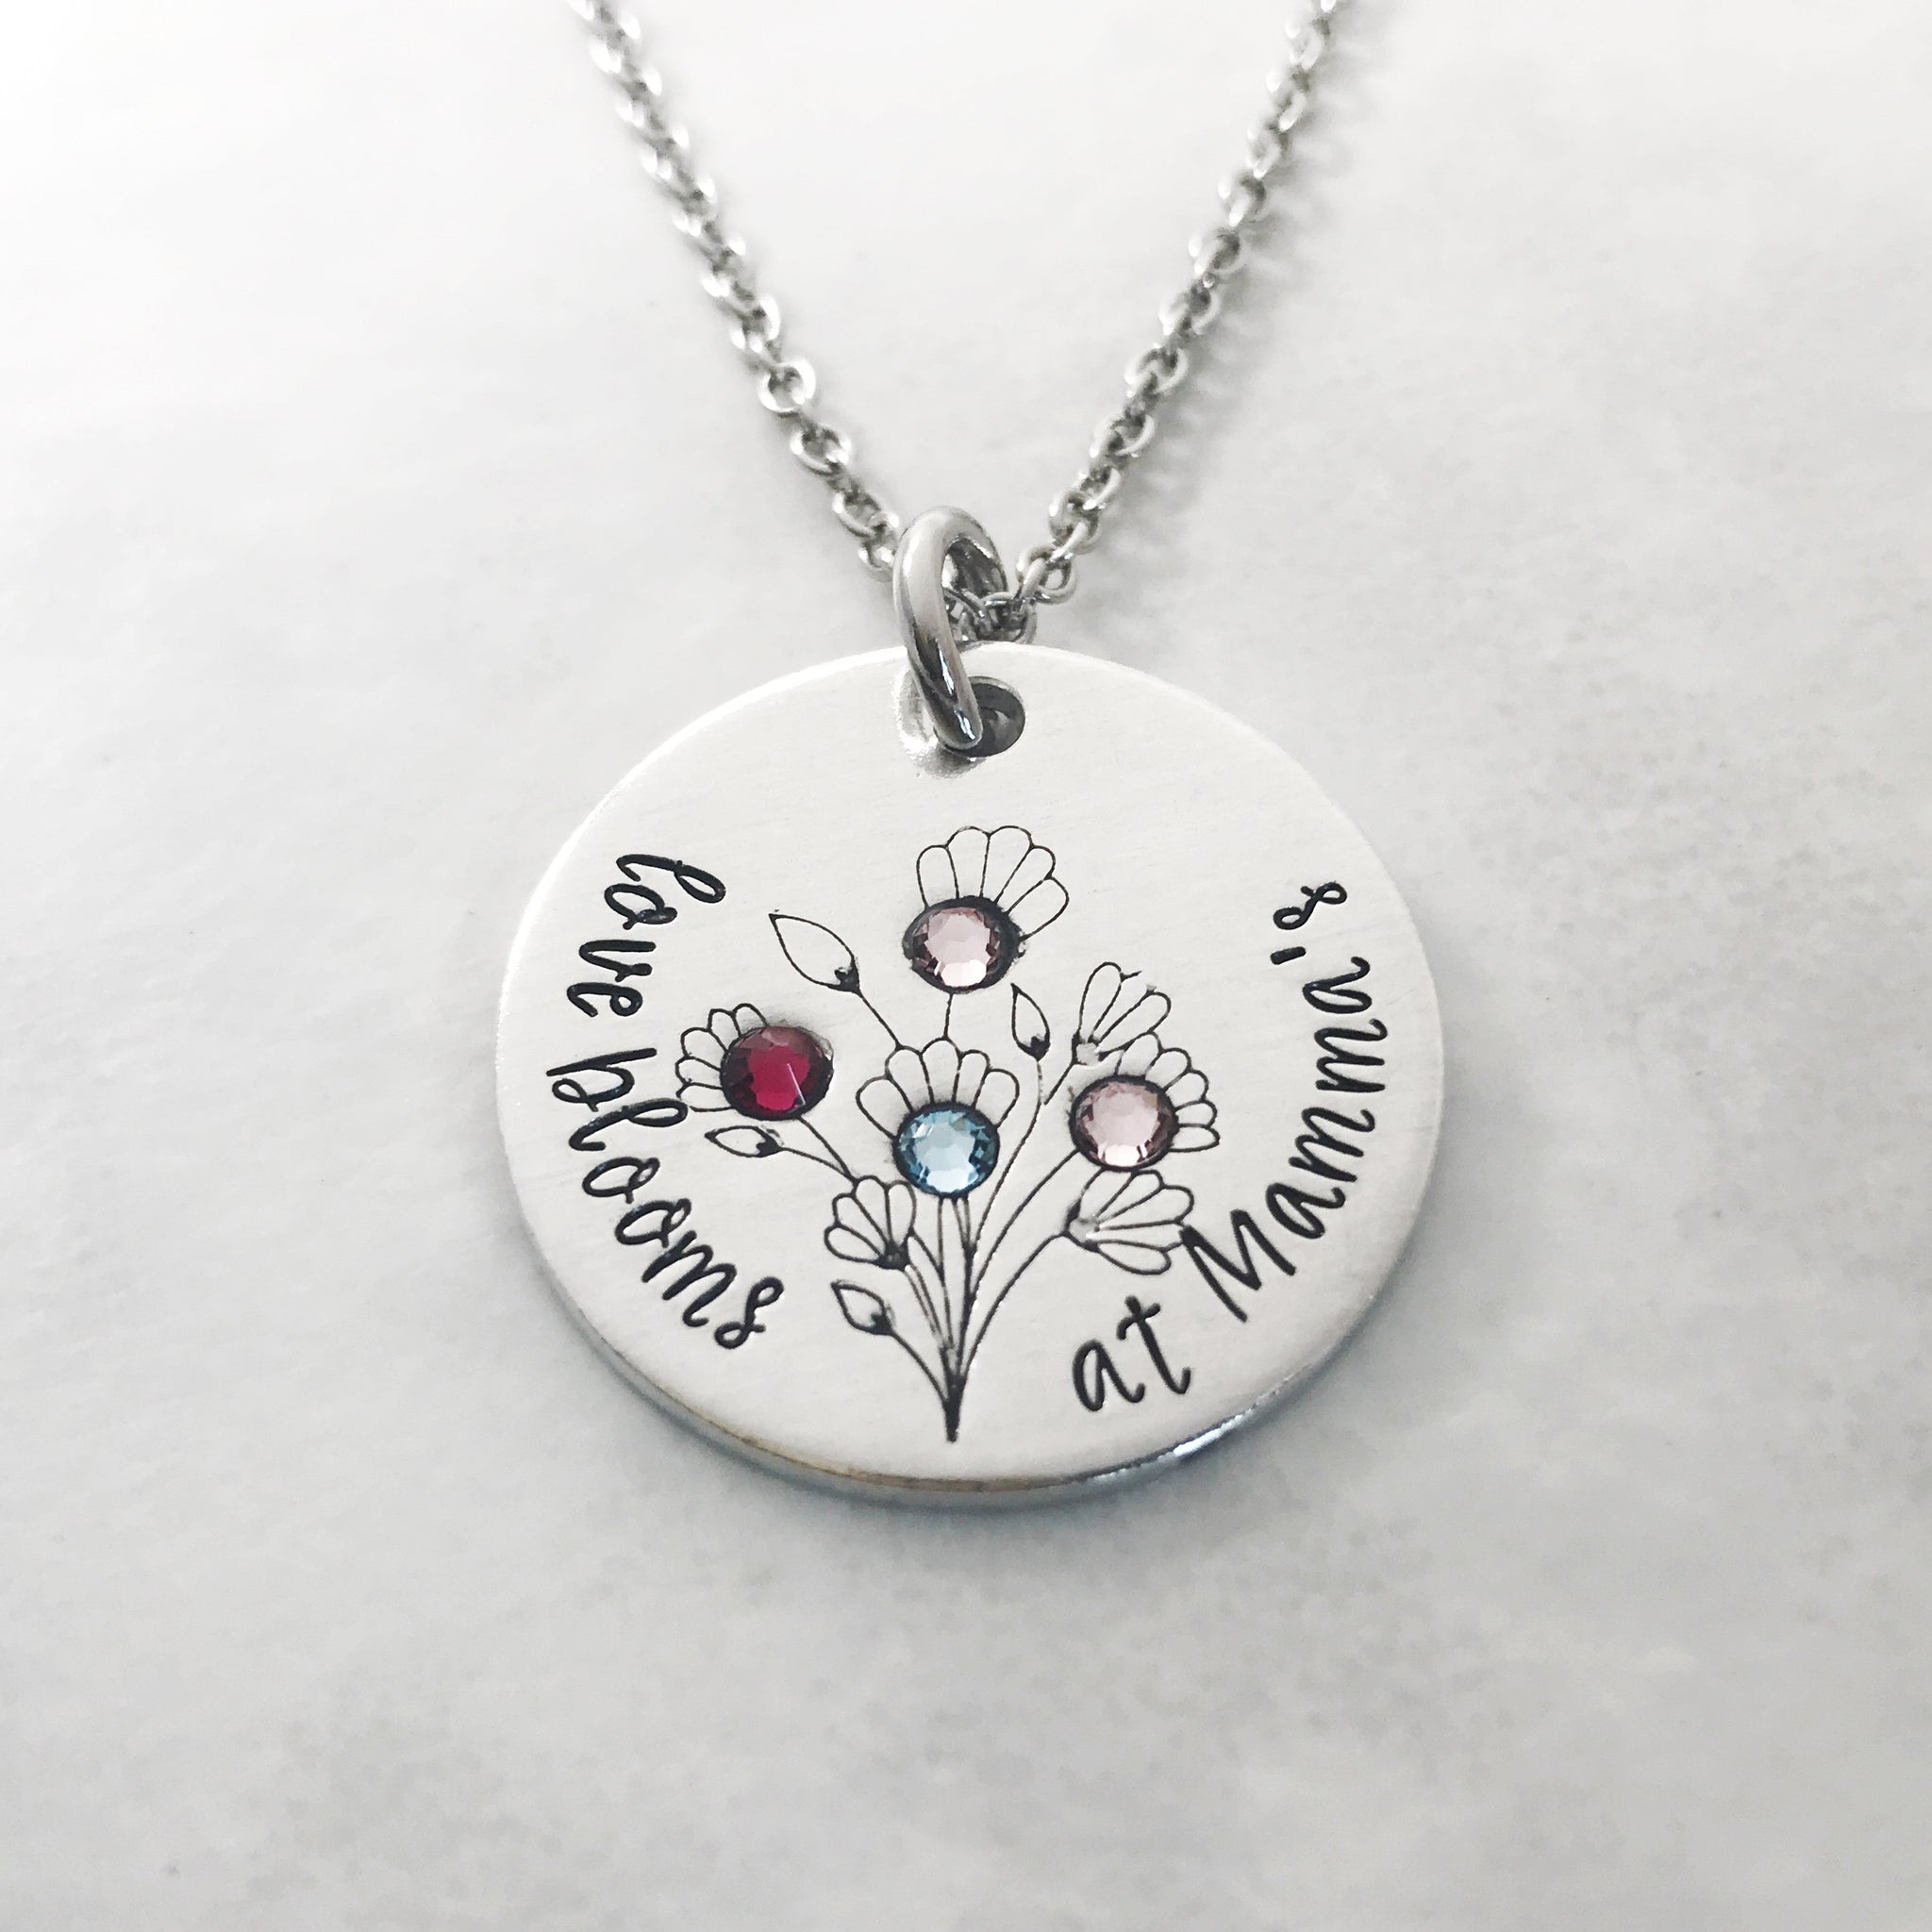 Family Birthstone Necklace with Heart – SilverbySwan